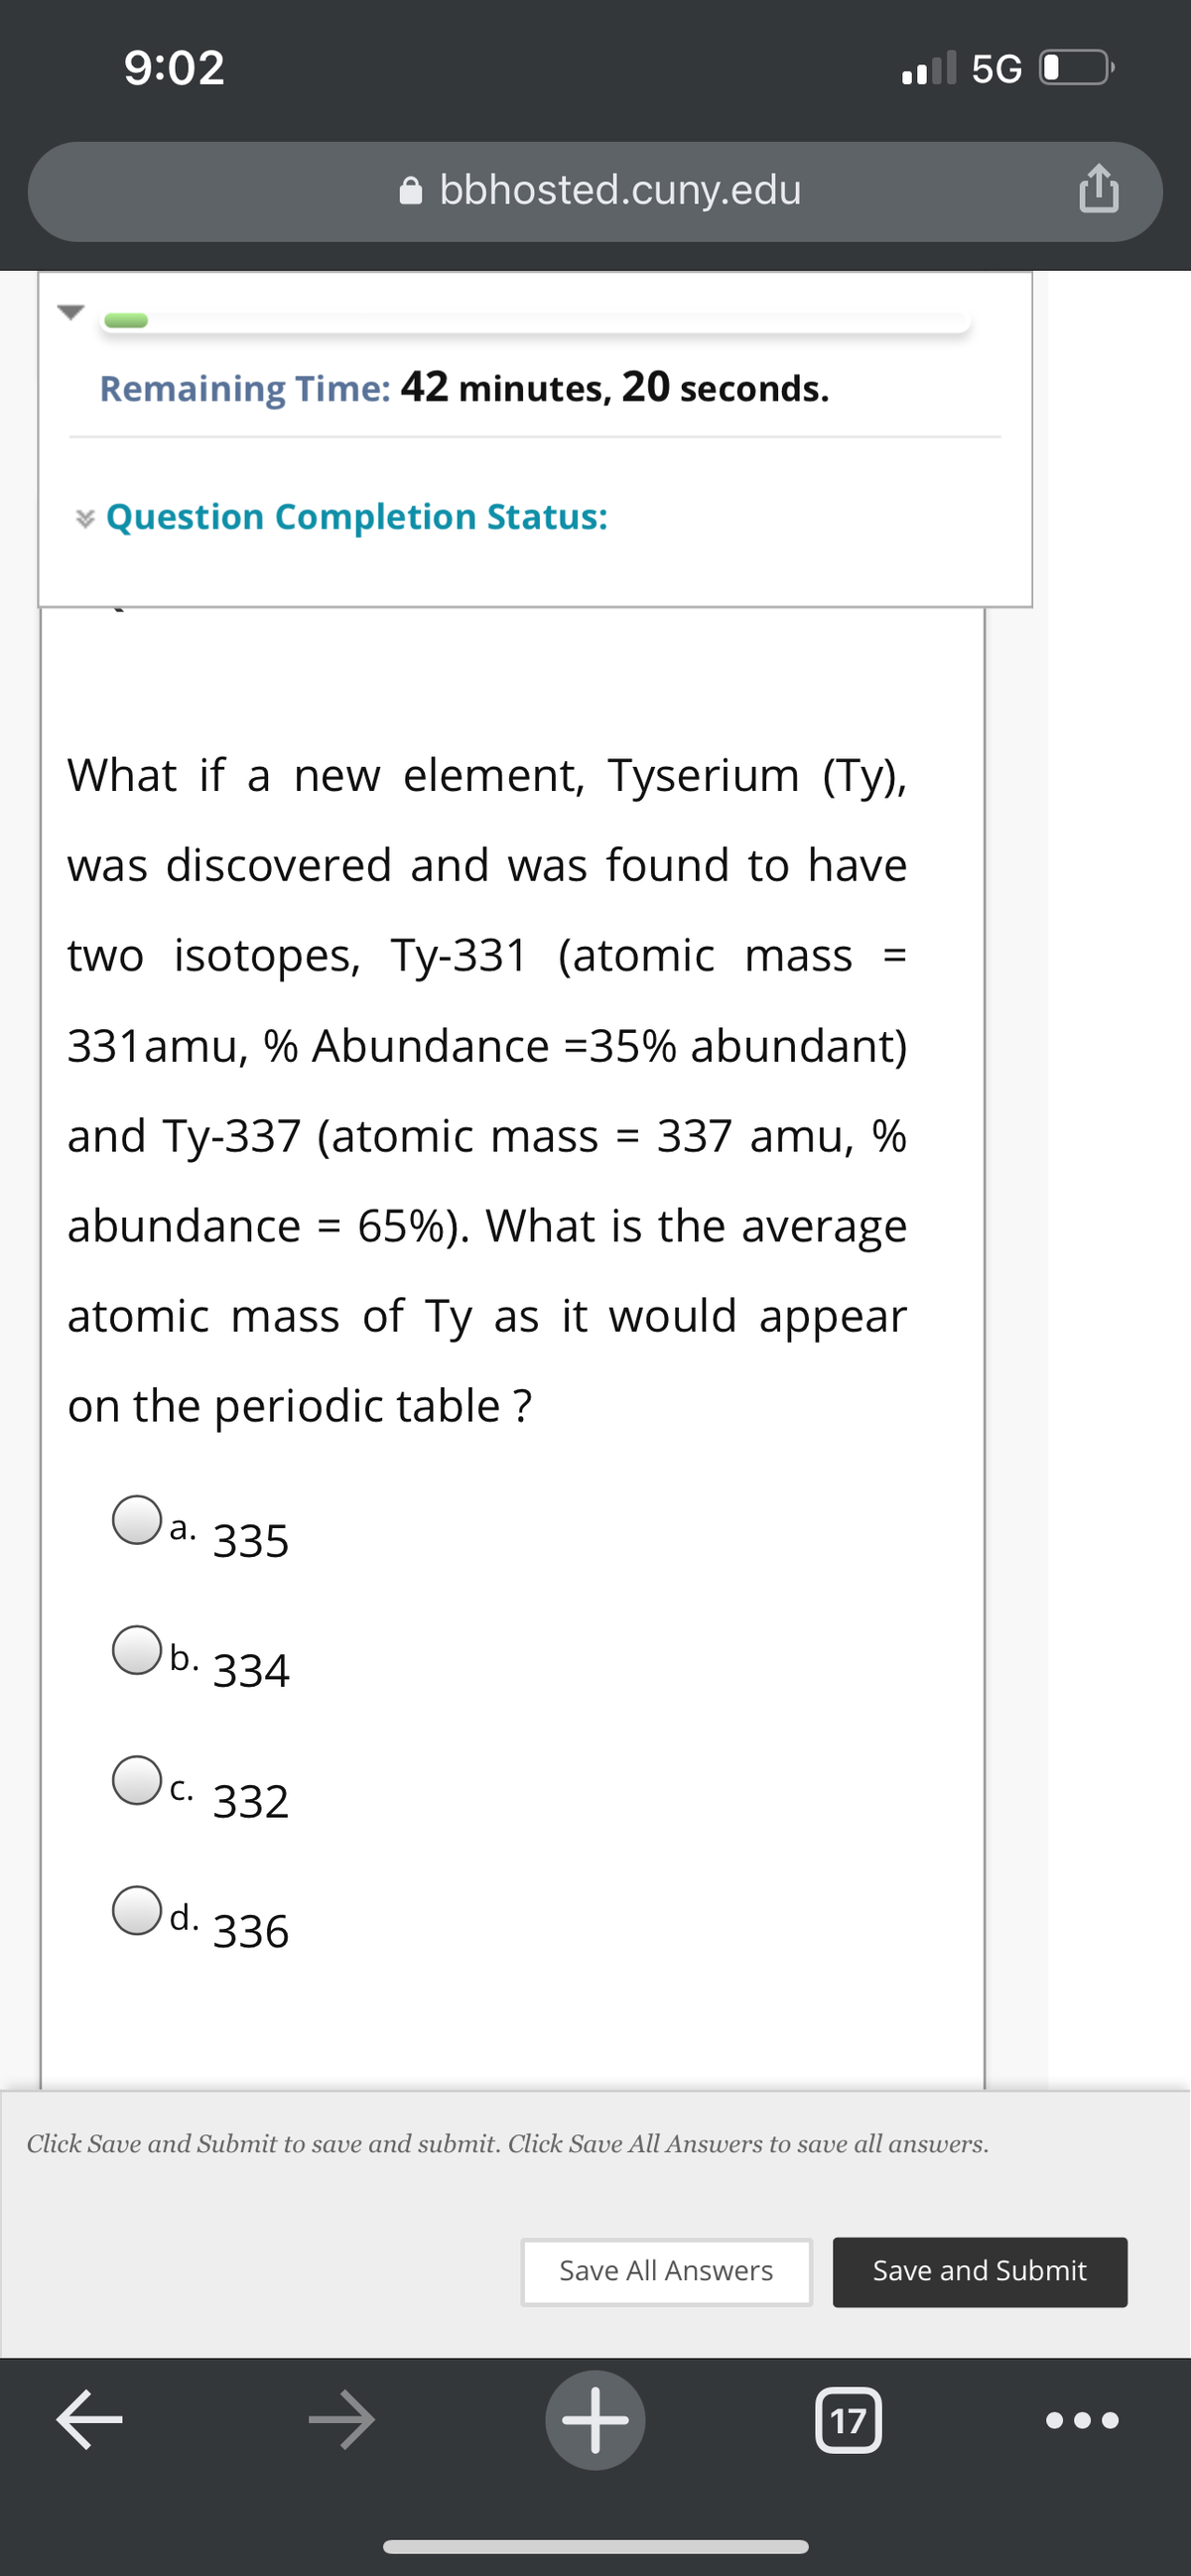 5G
9:02
bbhosted.cuny.edu
Remaining Time: 42 minutes, 20 seconds.
v Question Completion Status:
What if a new element, Tyserium (Ty),
was discovered and was found to have
two isotopes, Ty-331 (atomic mass =
331amu, % Abundance =35% abundant)
and Ty-337 (atomic mass = 337 amu, %
abundance = 65%). What is the average
atomic mass of Ty as it would appear
on the periodic table ?
) а. 335
Ob. 334
Oc. 332
Od. 336
Click Save and Submit to save and submit. Click Save All Answers to save all answers.
Save All Answers
Save and Submit
+
17
